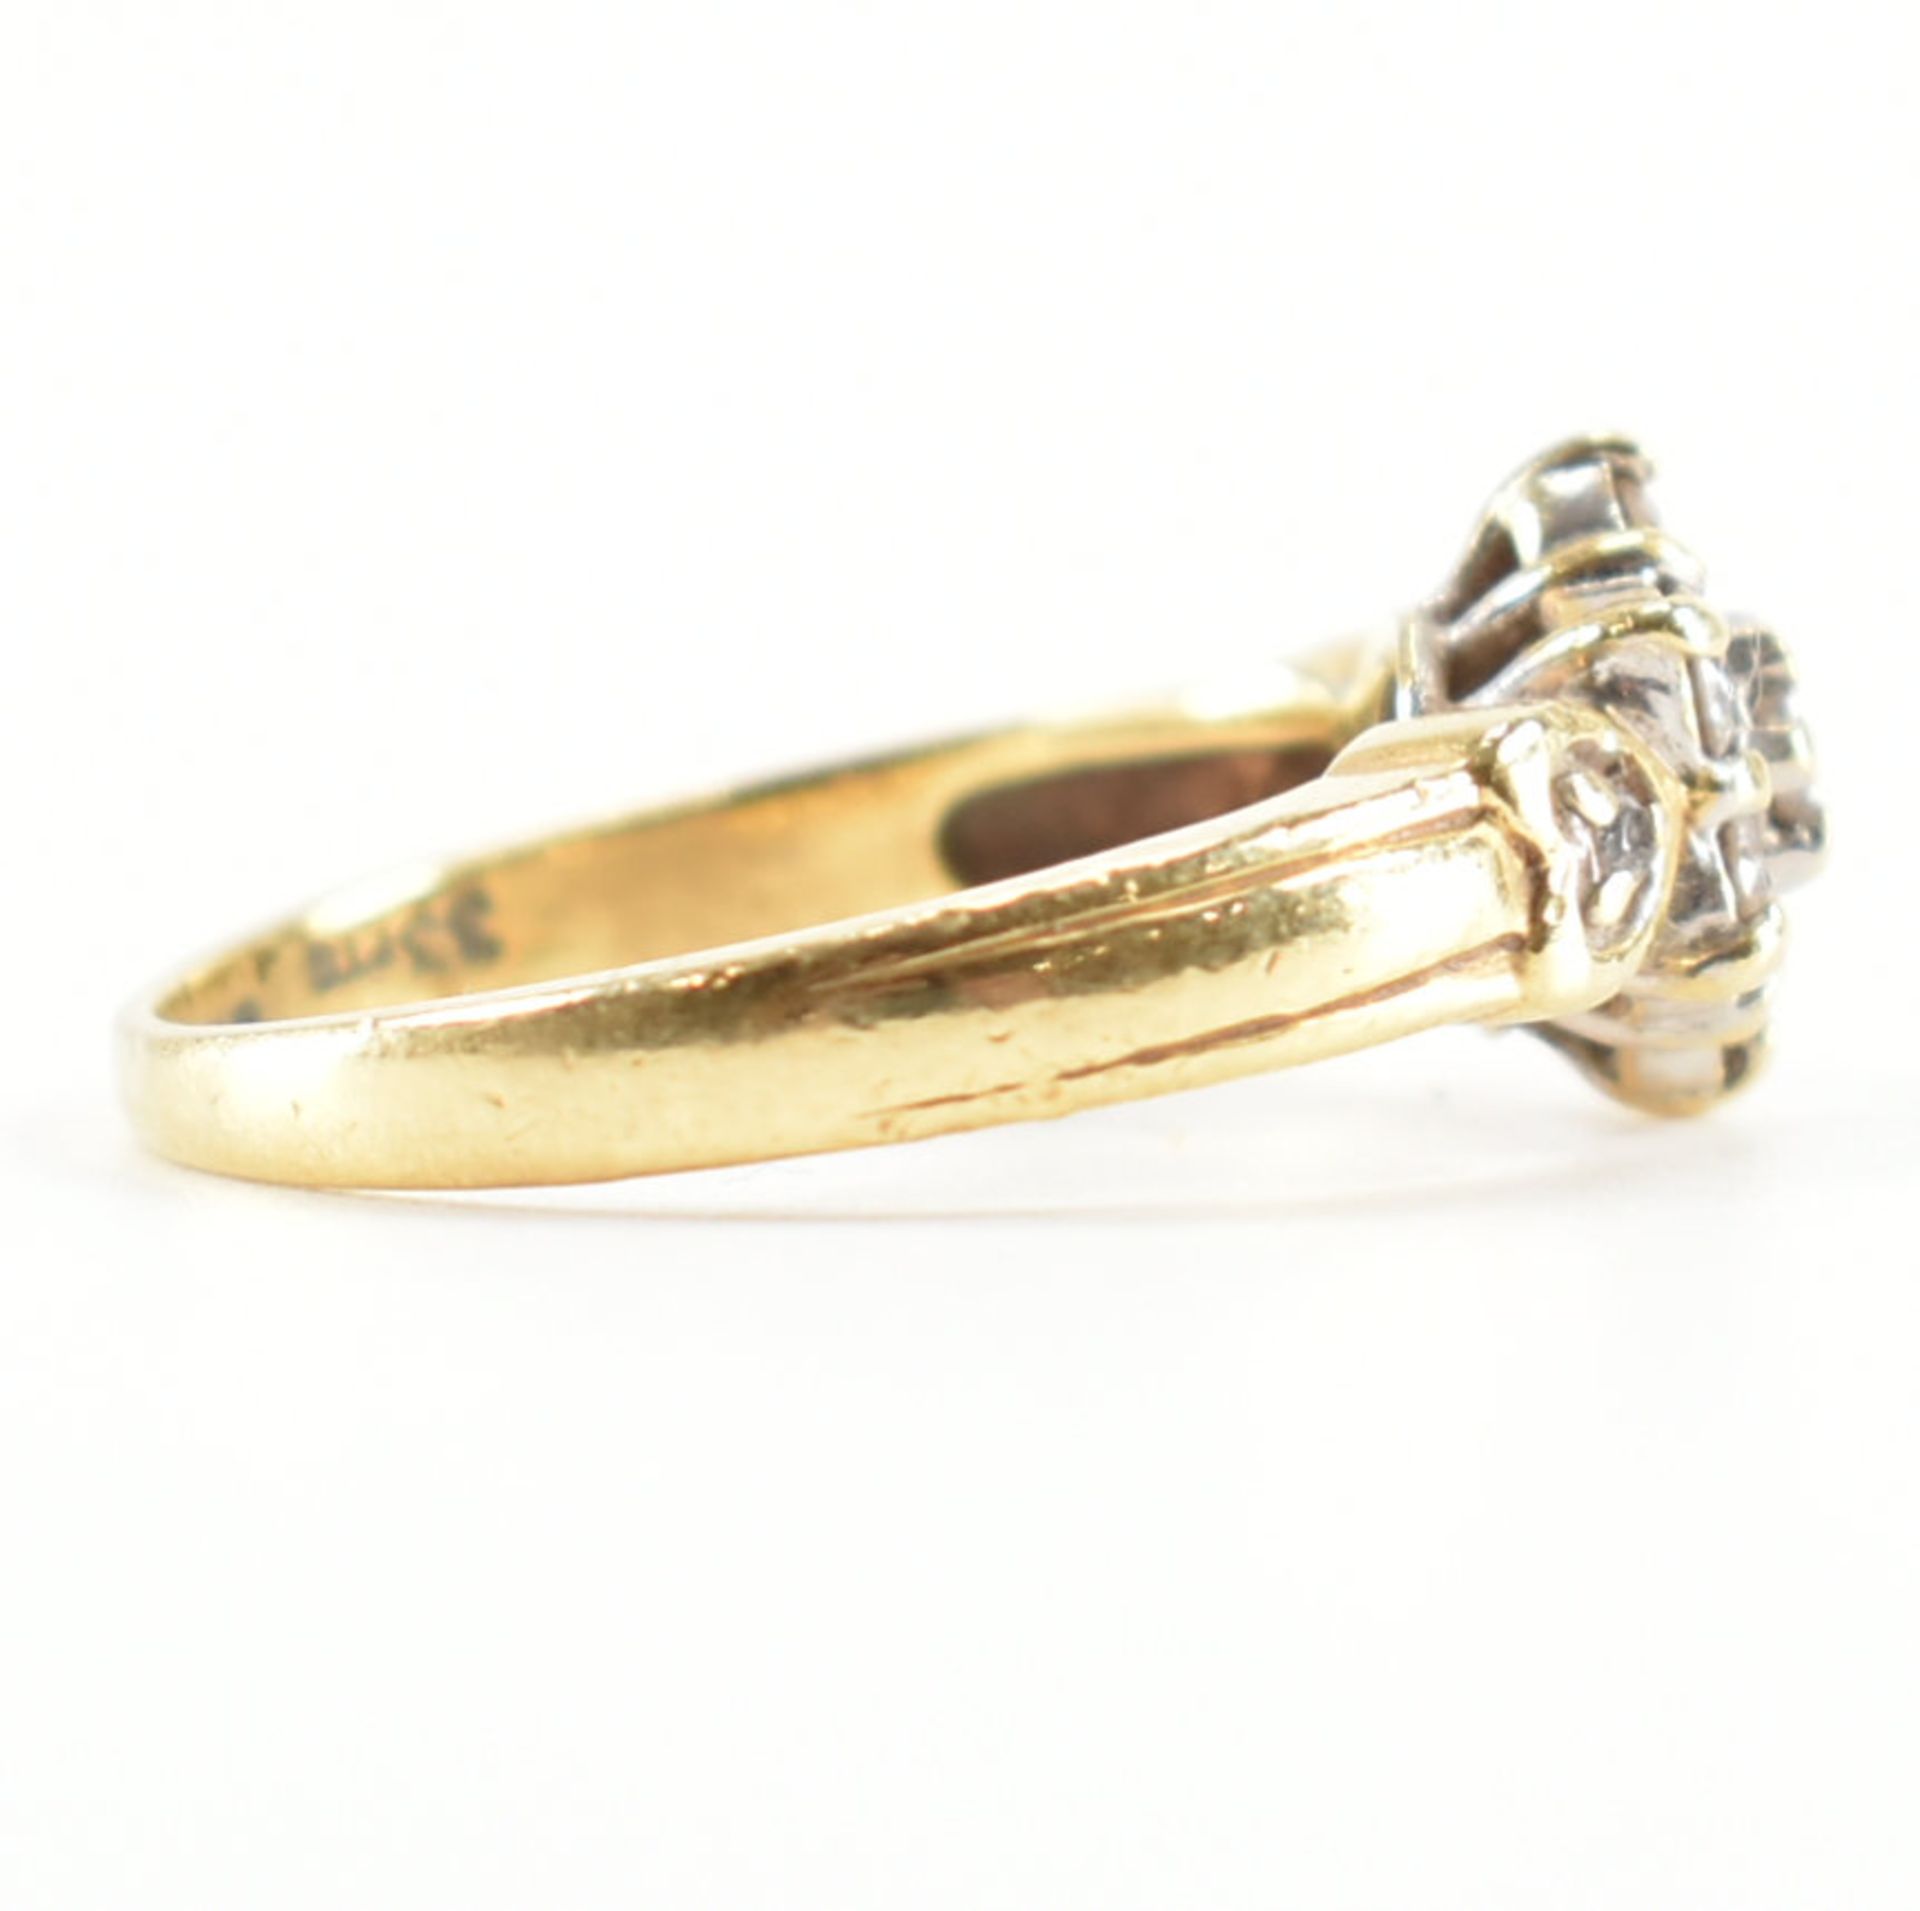 HALLMARKED 18CT GOLD & DIAMOND CLUSTER RING - Image 5 of 9